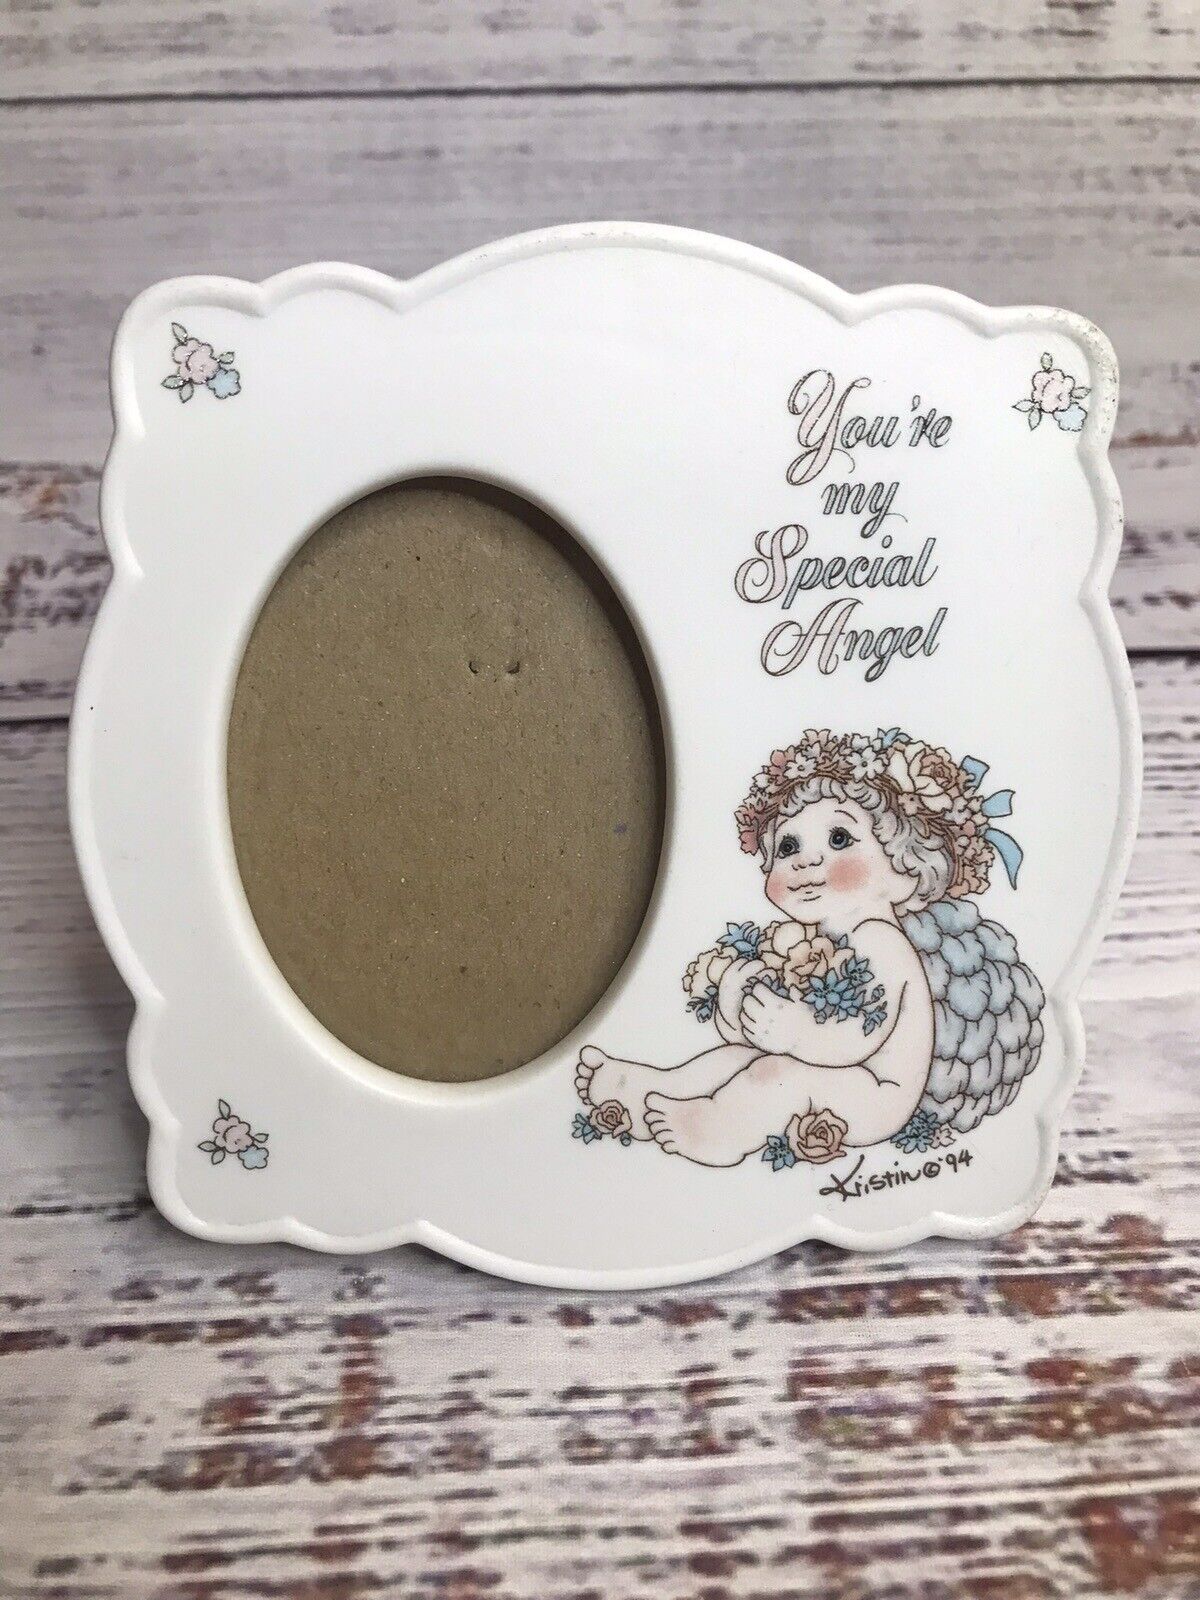 Kristin 1994 You’re My Special Angel Small Picture Frame Ceramic Vintage